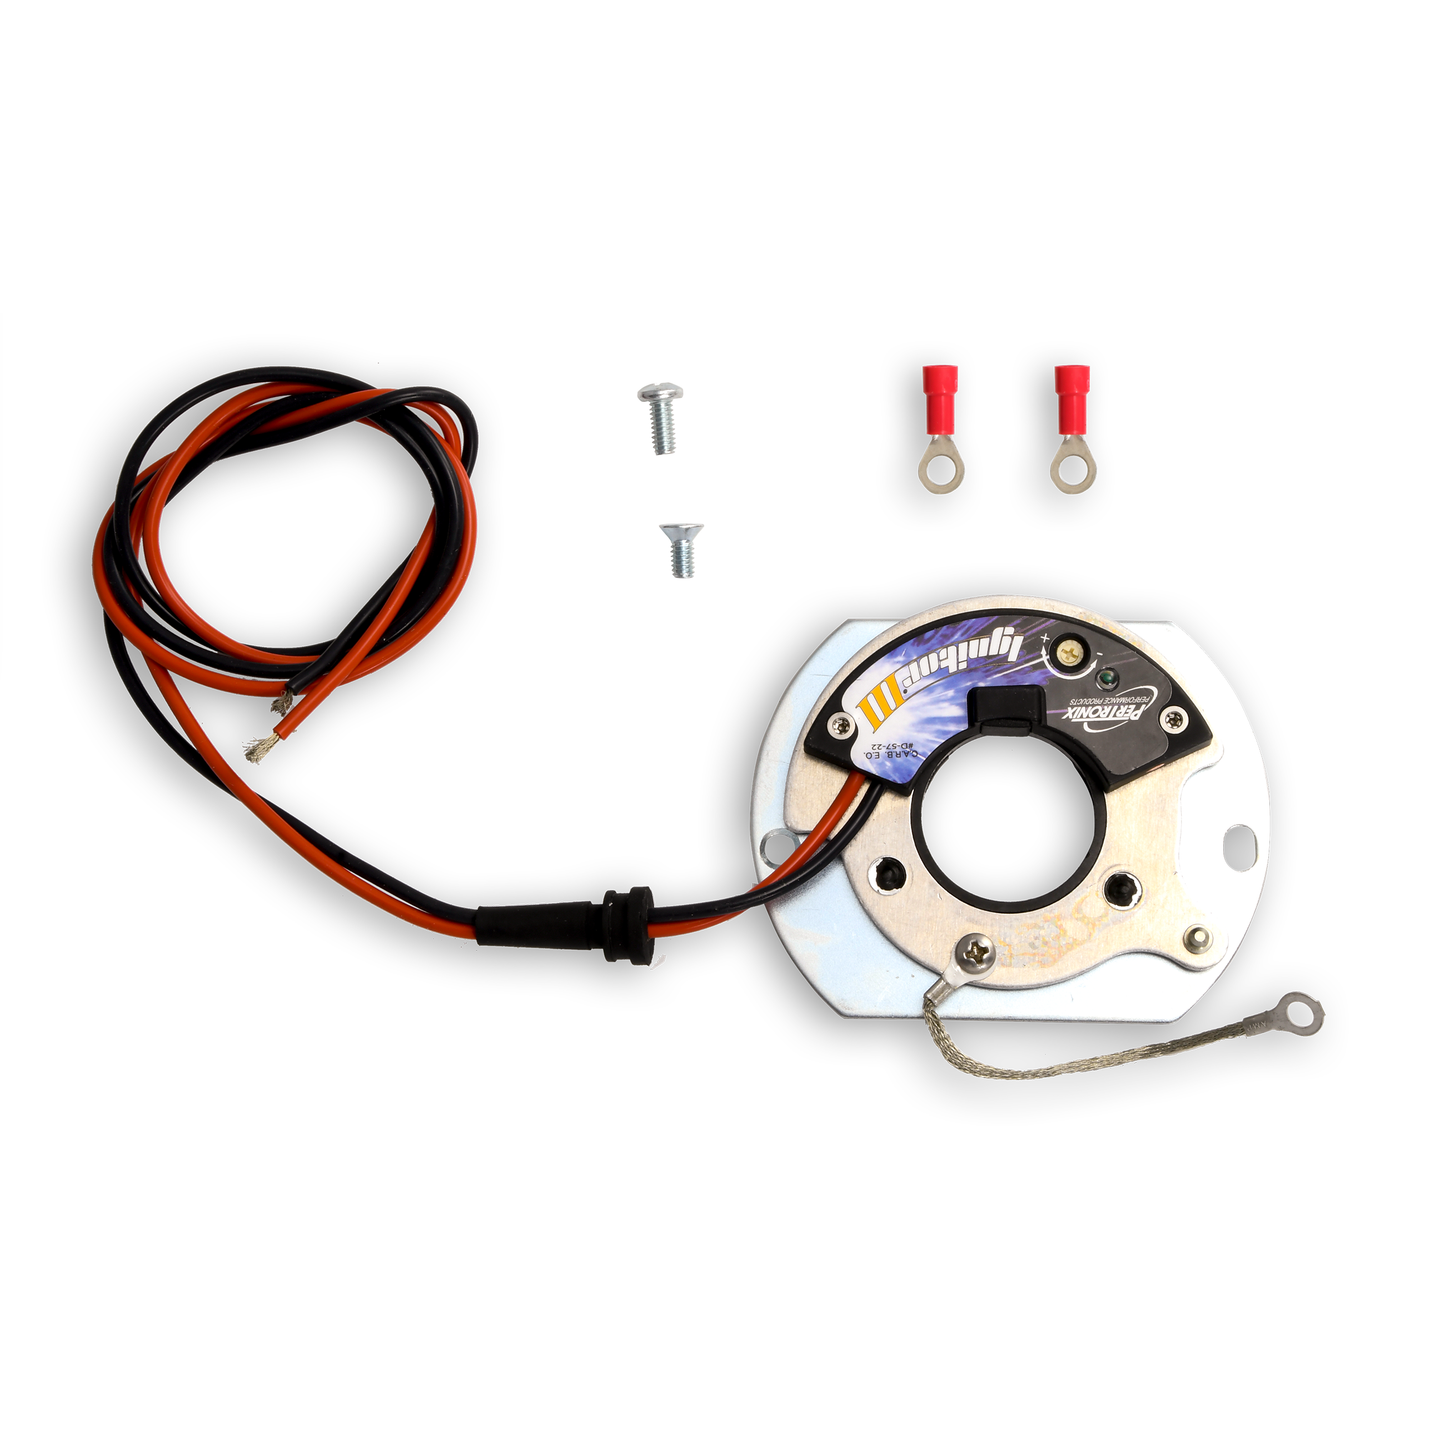 PerTronix 71281 Ignitor® III Ford 8 cyl Electronic Ignition Conversion Kit